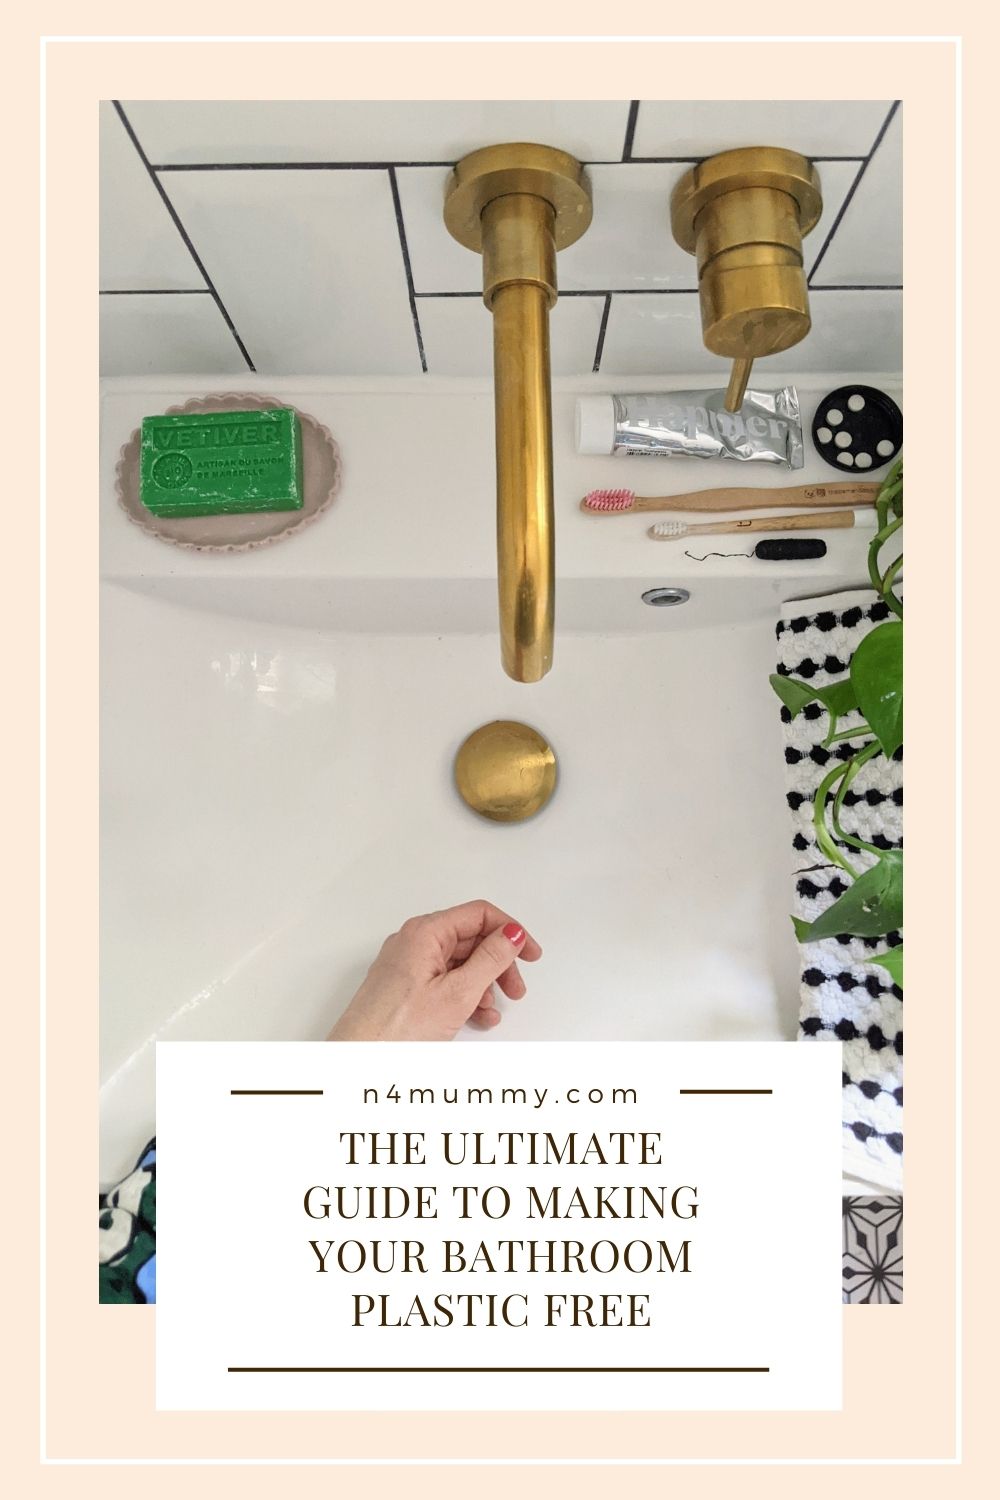 The Ultimate Guide to Making Your Bathroom Plastic Free